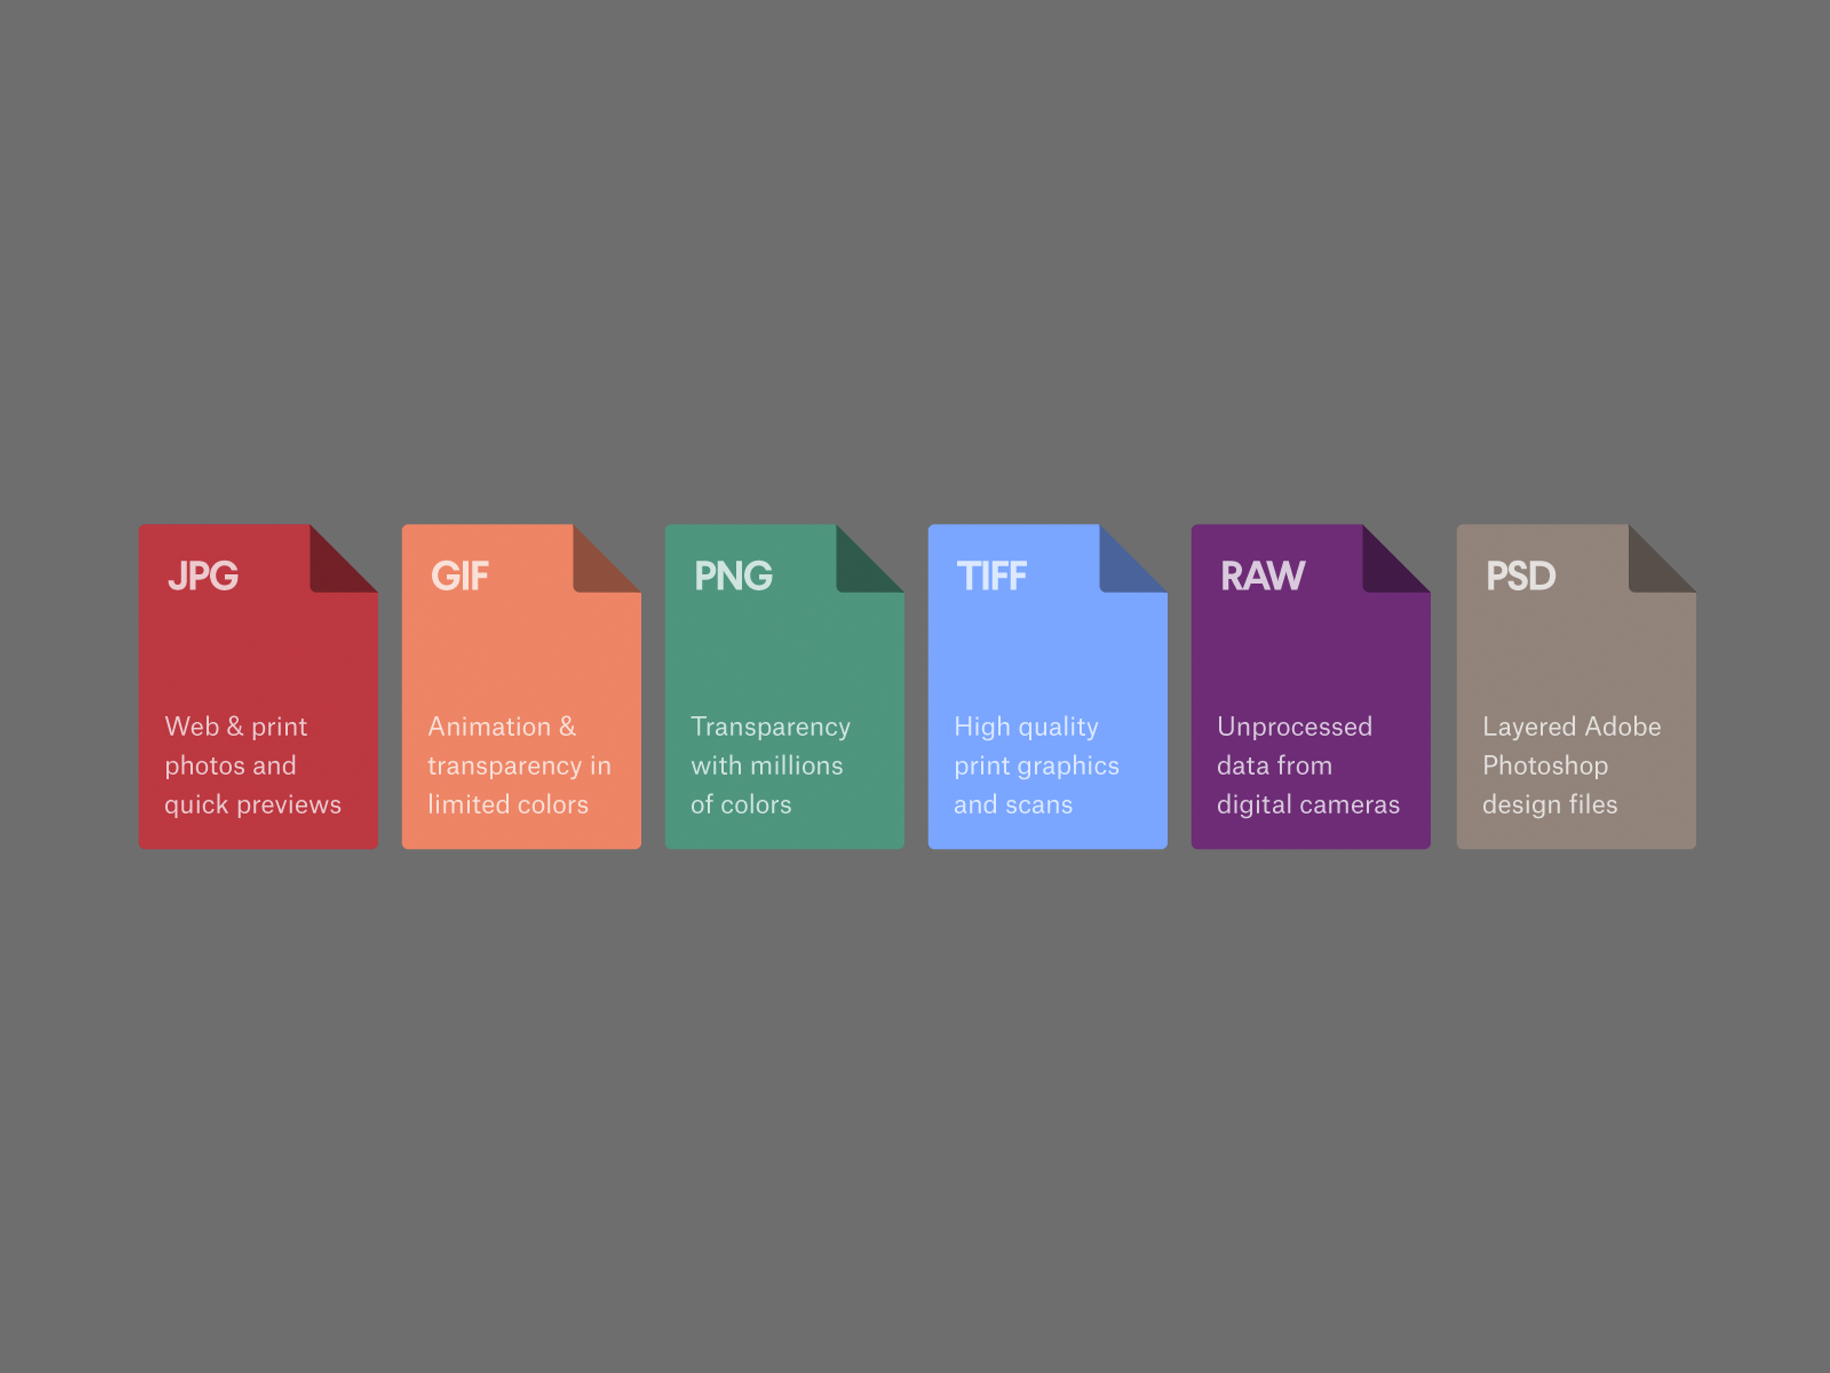 Image file formats: when to use each type of file.